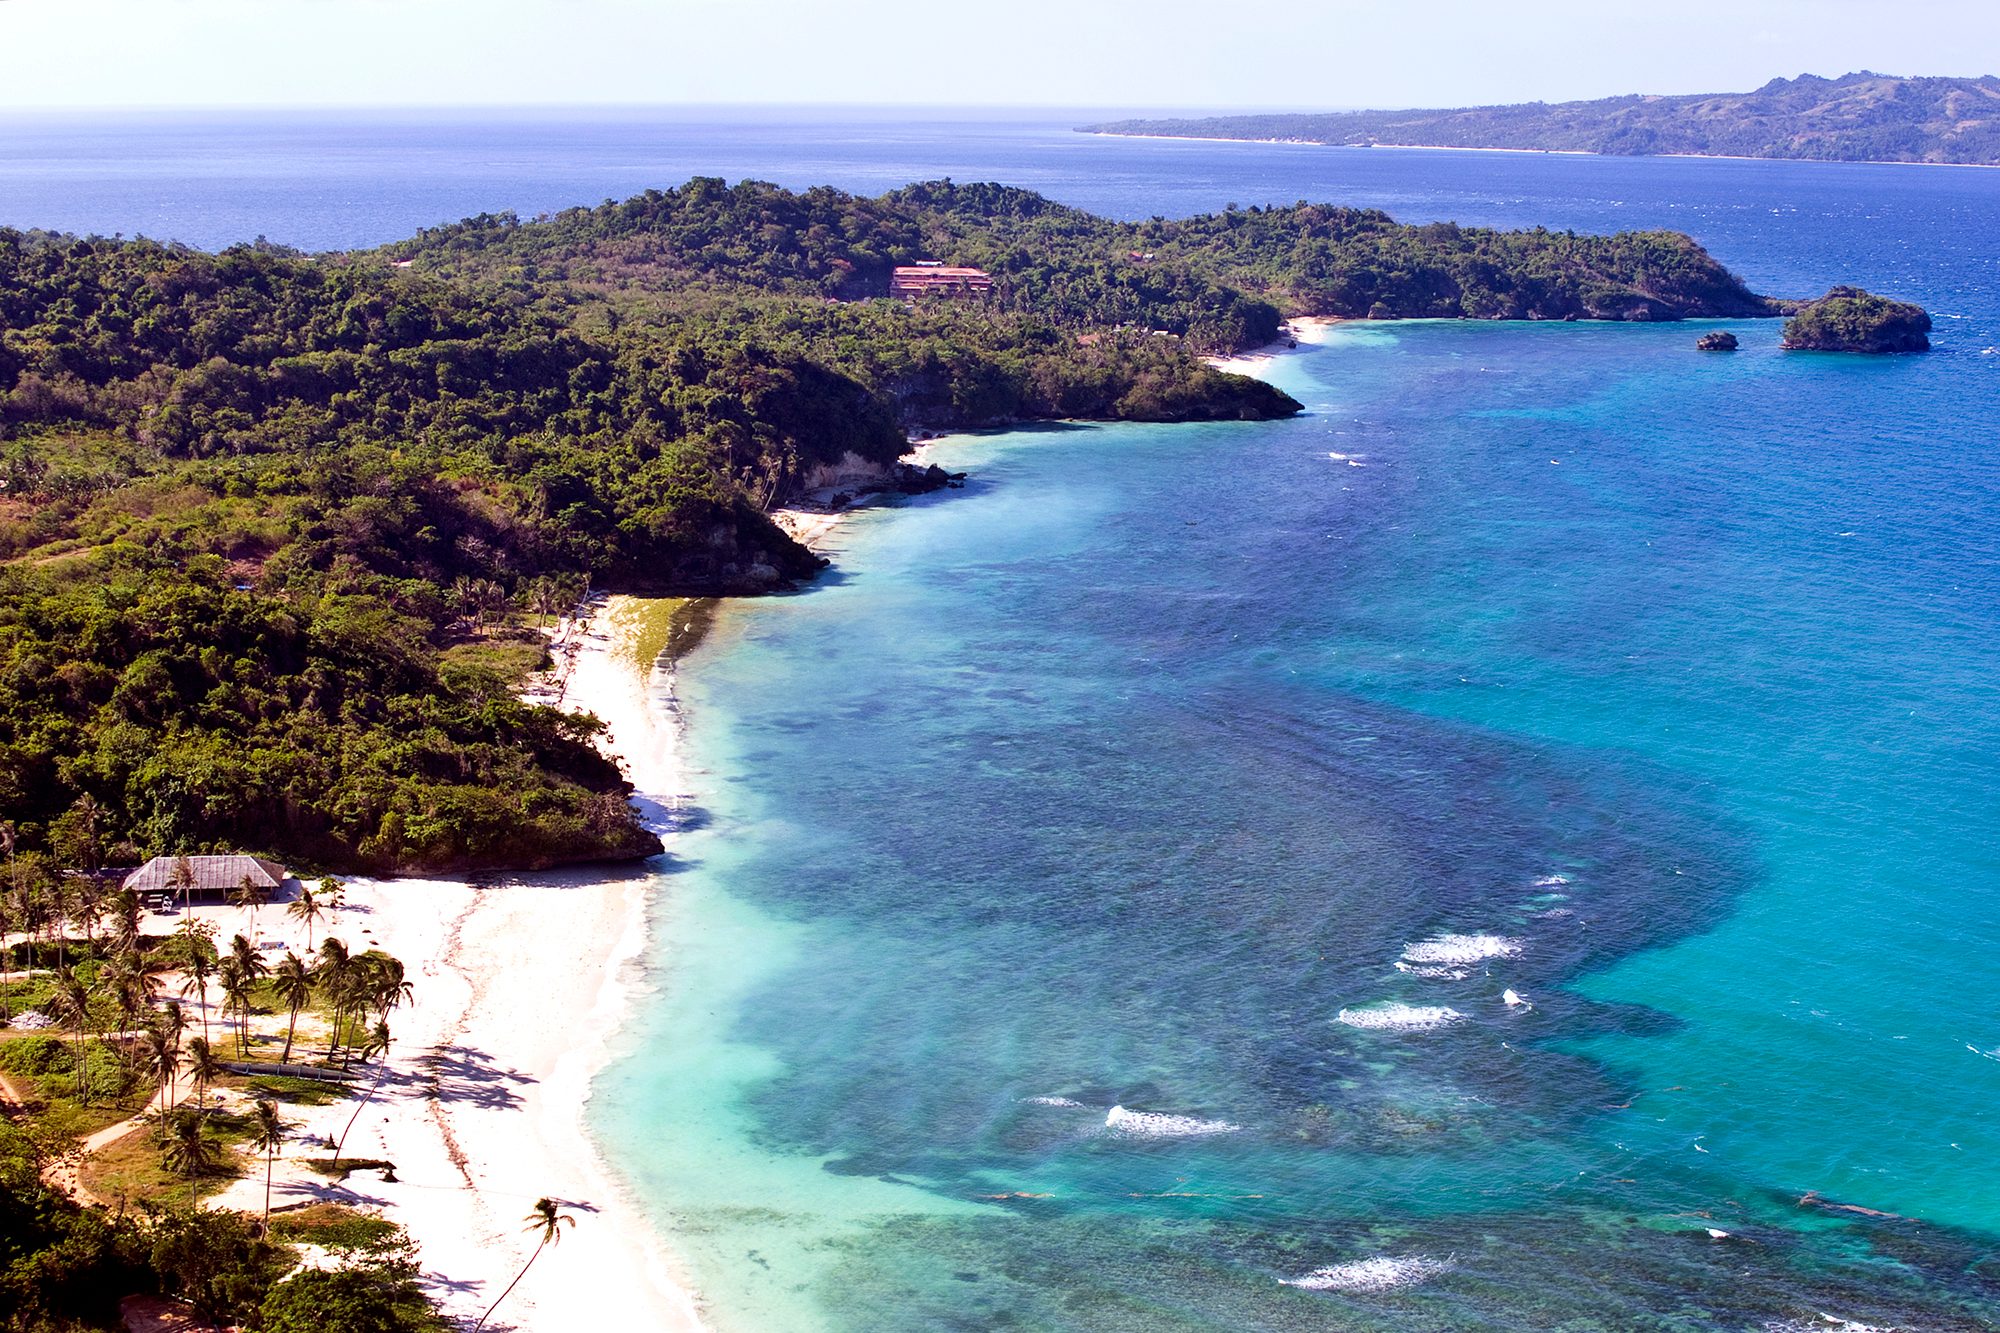 Only 8 hectares of Boracay land to be distributed to Ati tribe